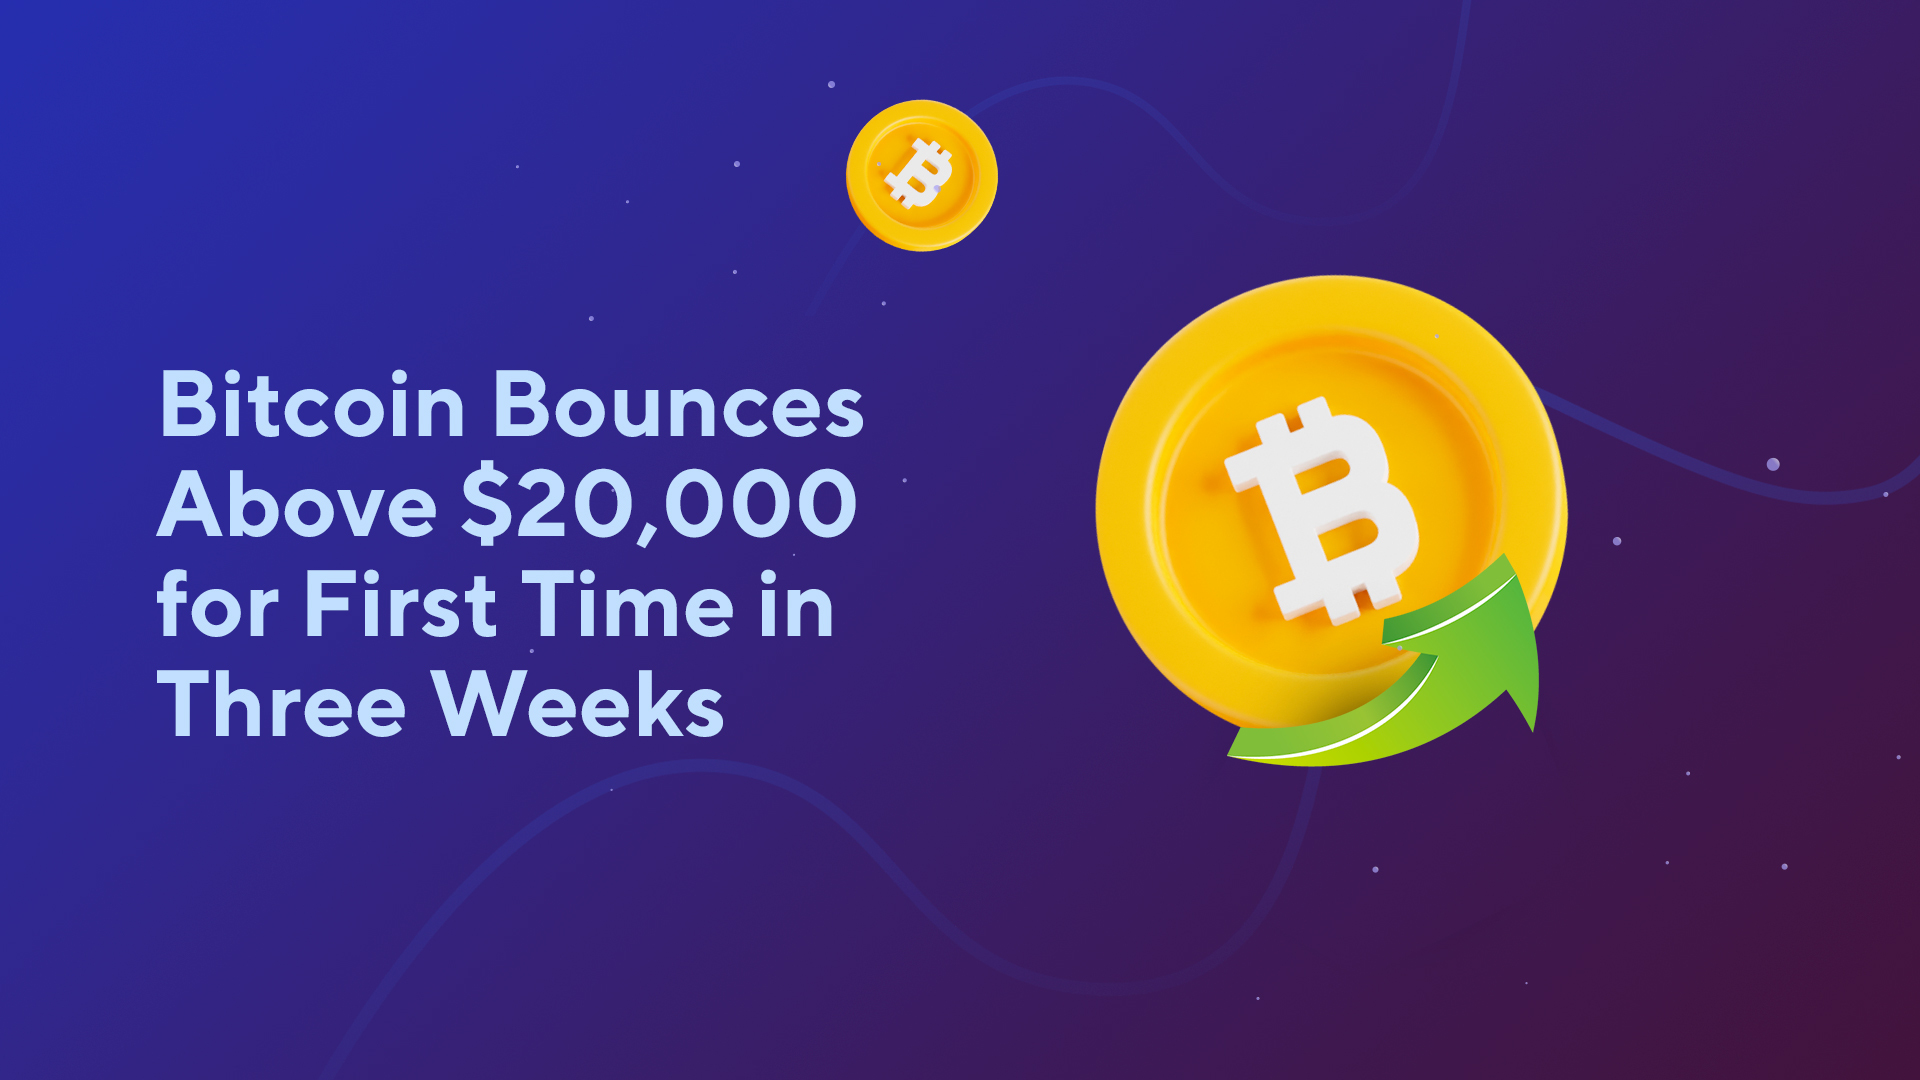 Bitcoin Bounces Above $20,000 for First Time in Three Weeks